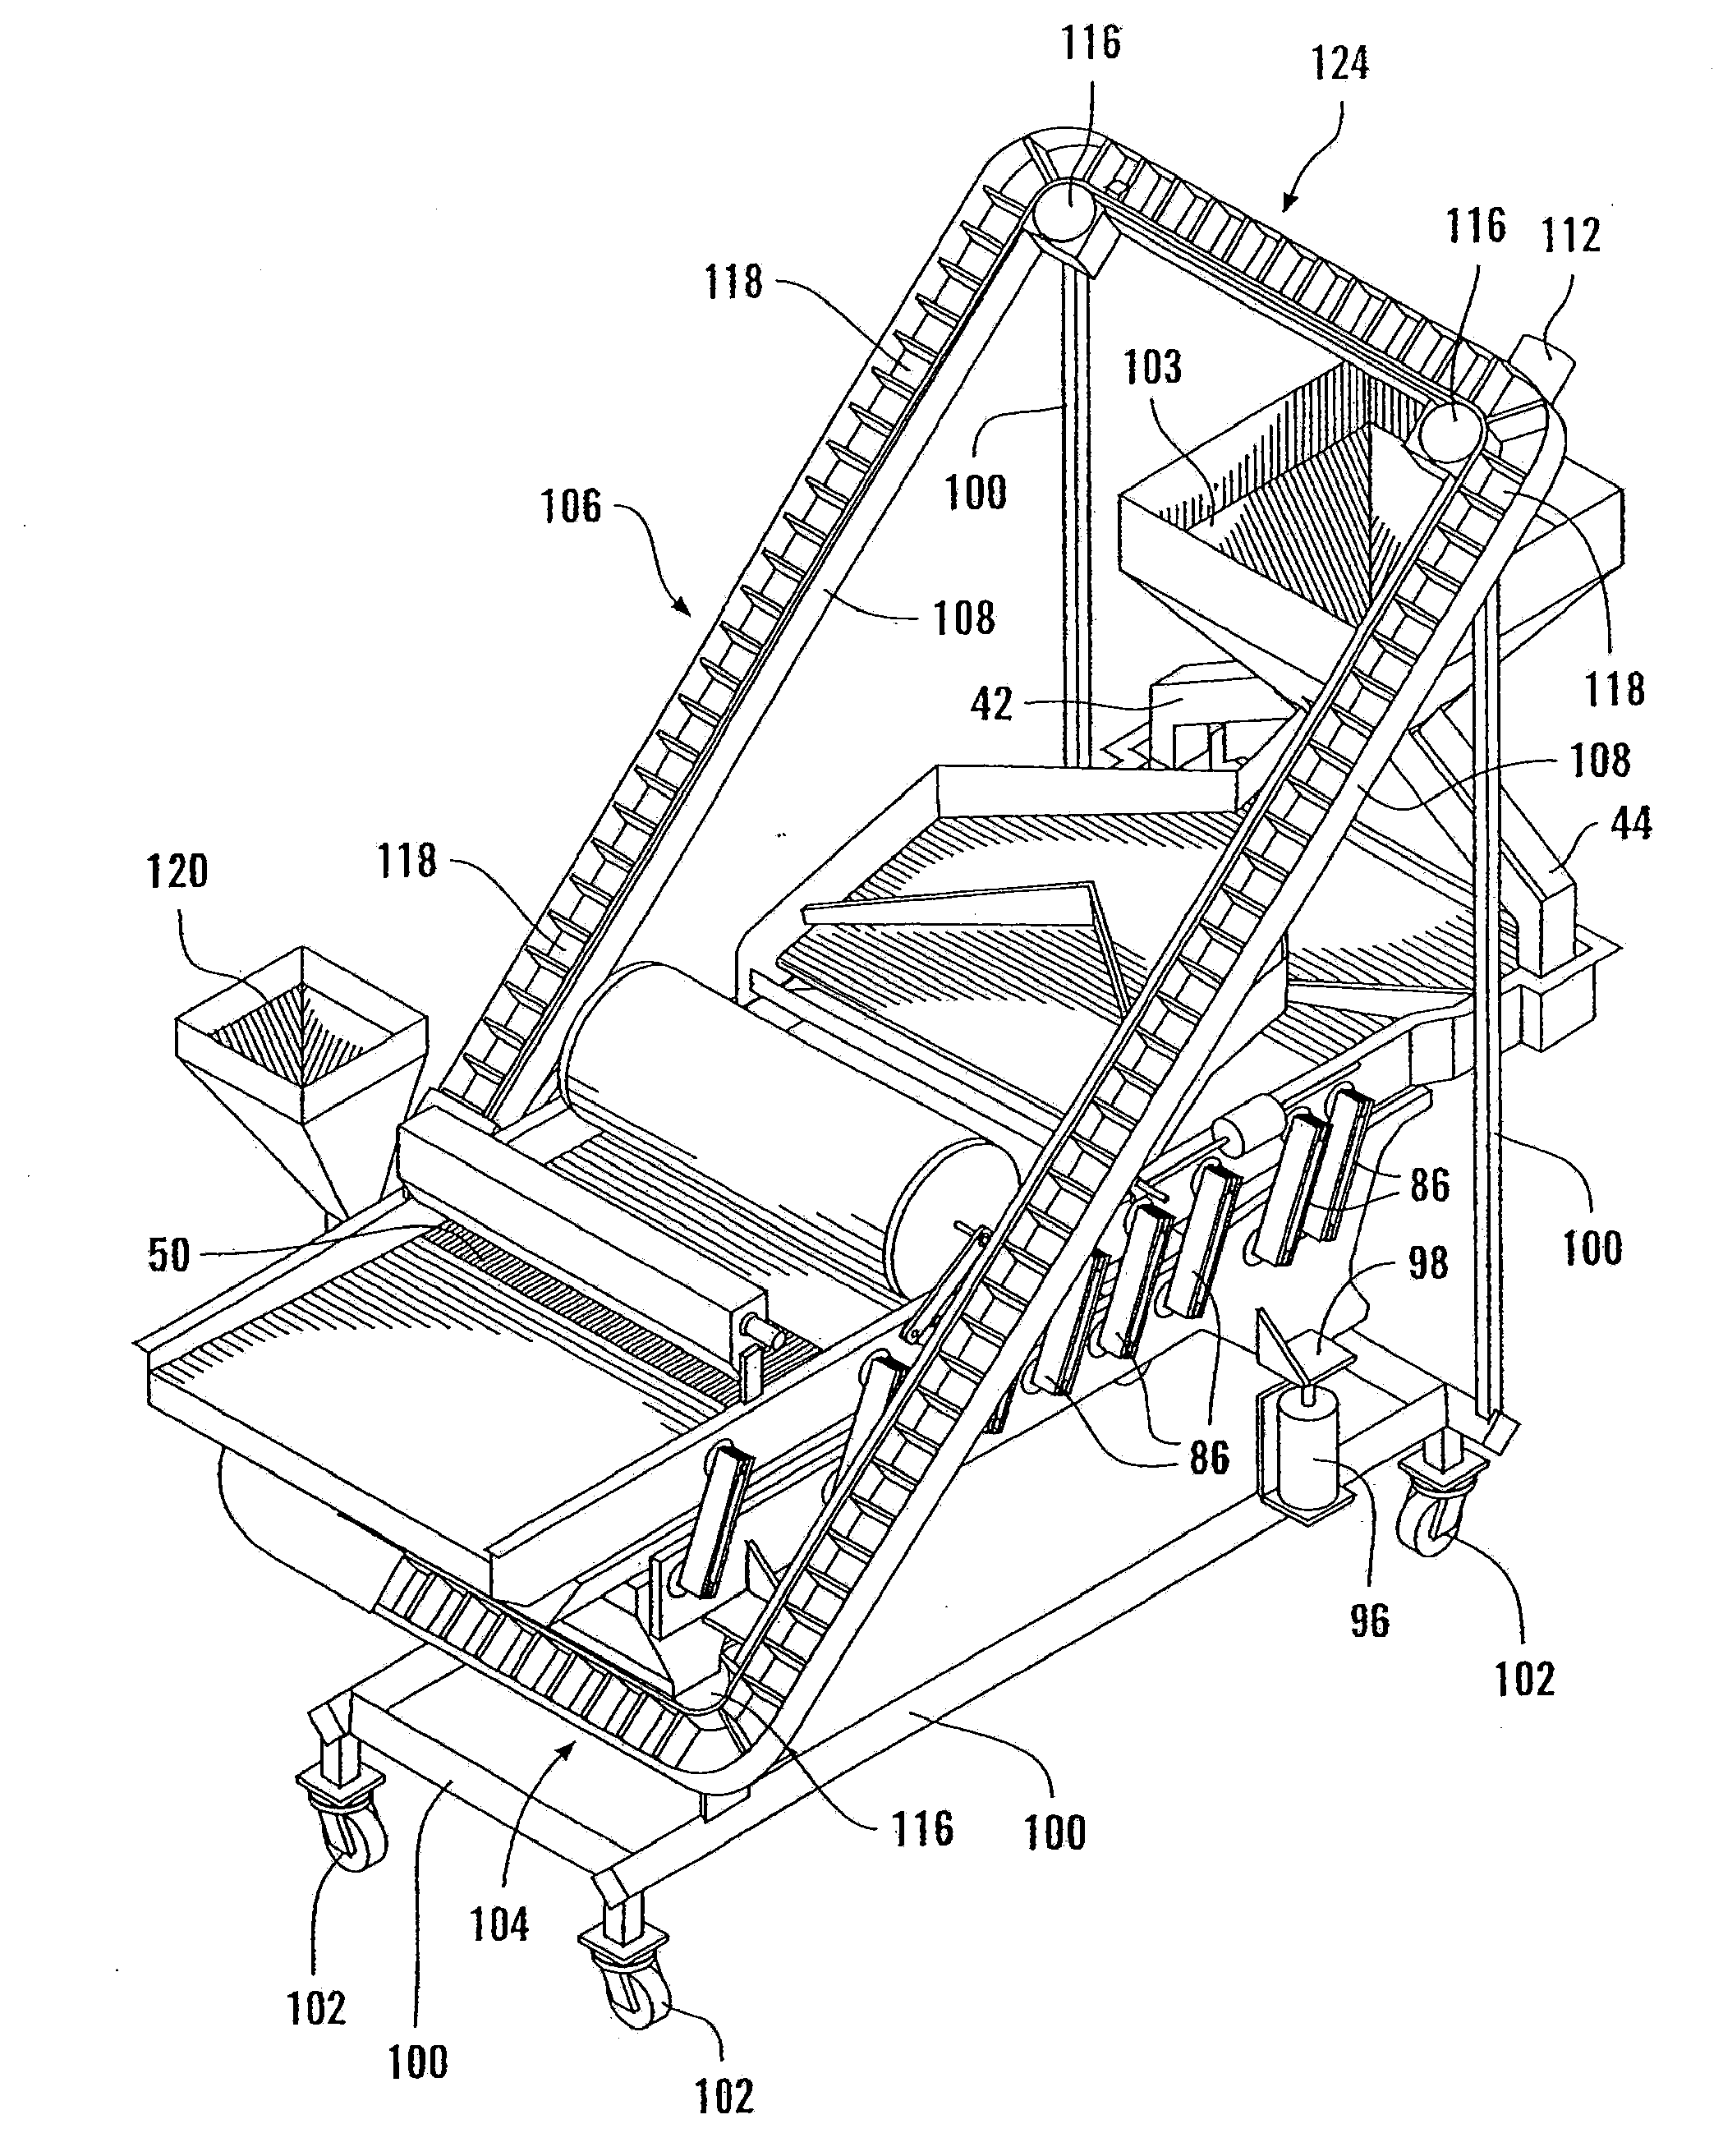 Food Coating and Topping Applicator Apparatus and Methods of Use Thereof